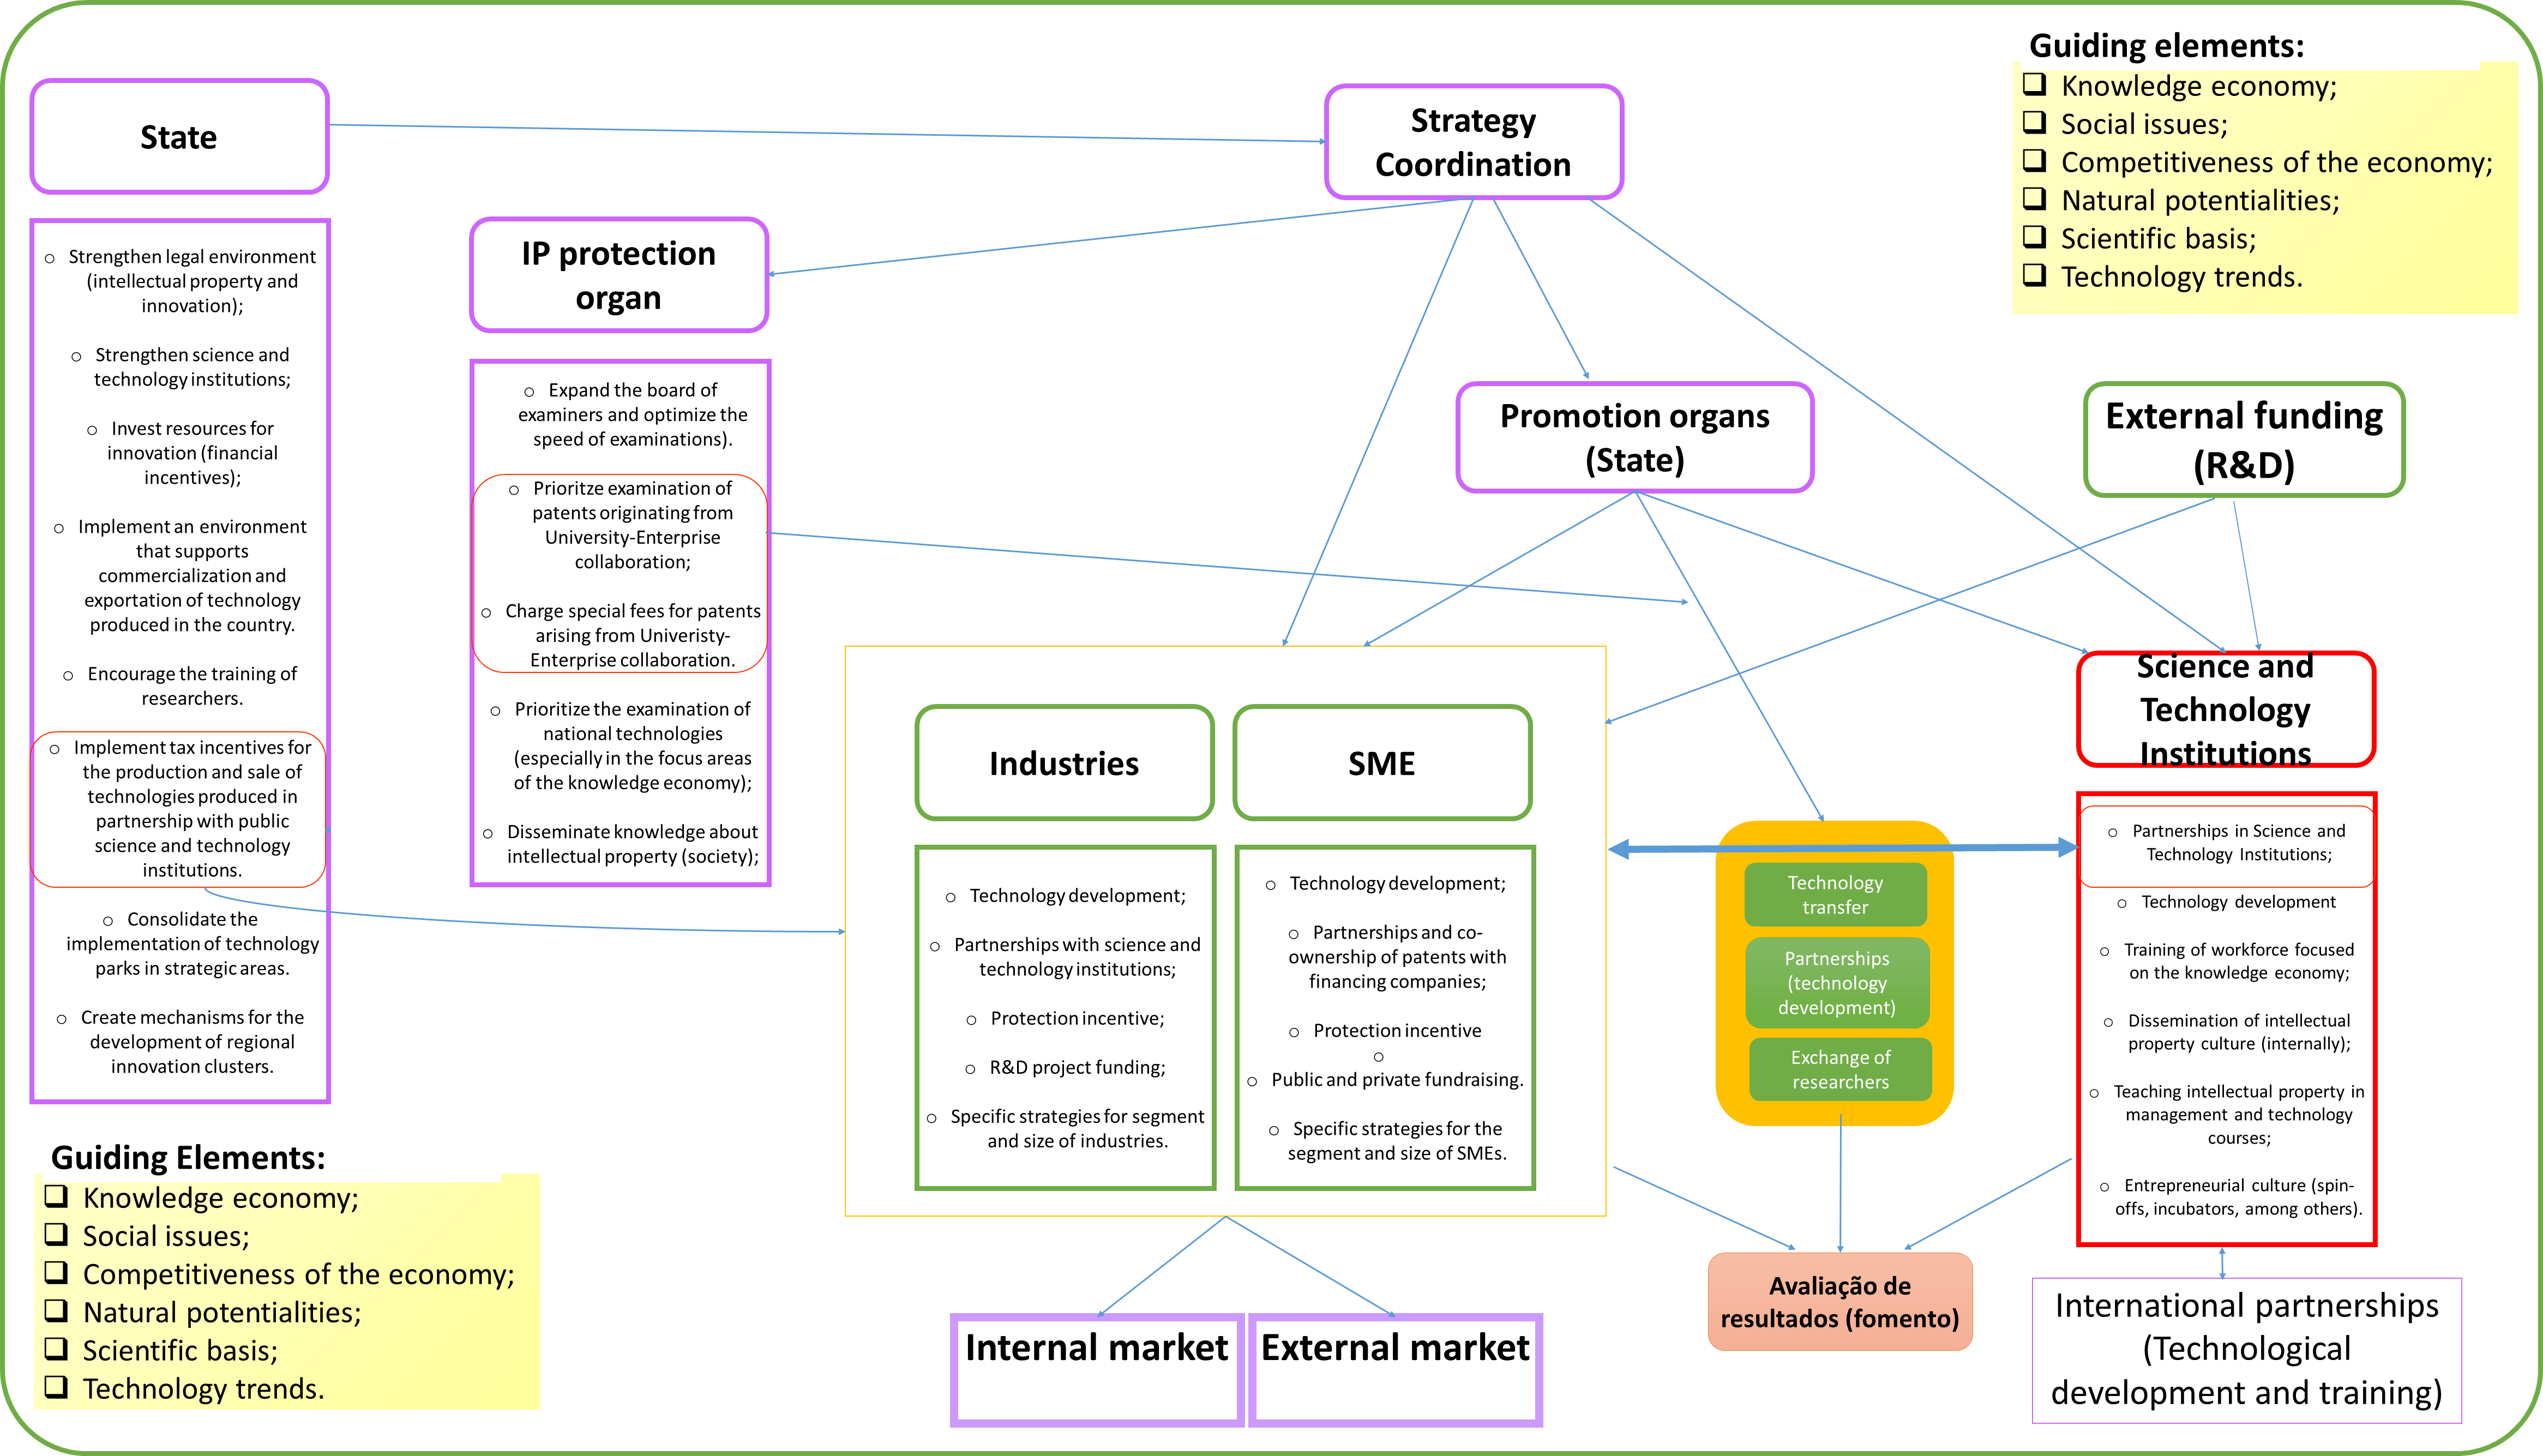 Suggestive conceptual framework for planning and organizing innovation and intellectual property systems in developing countries